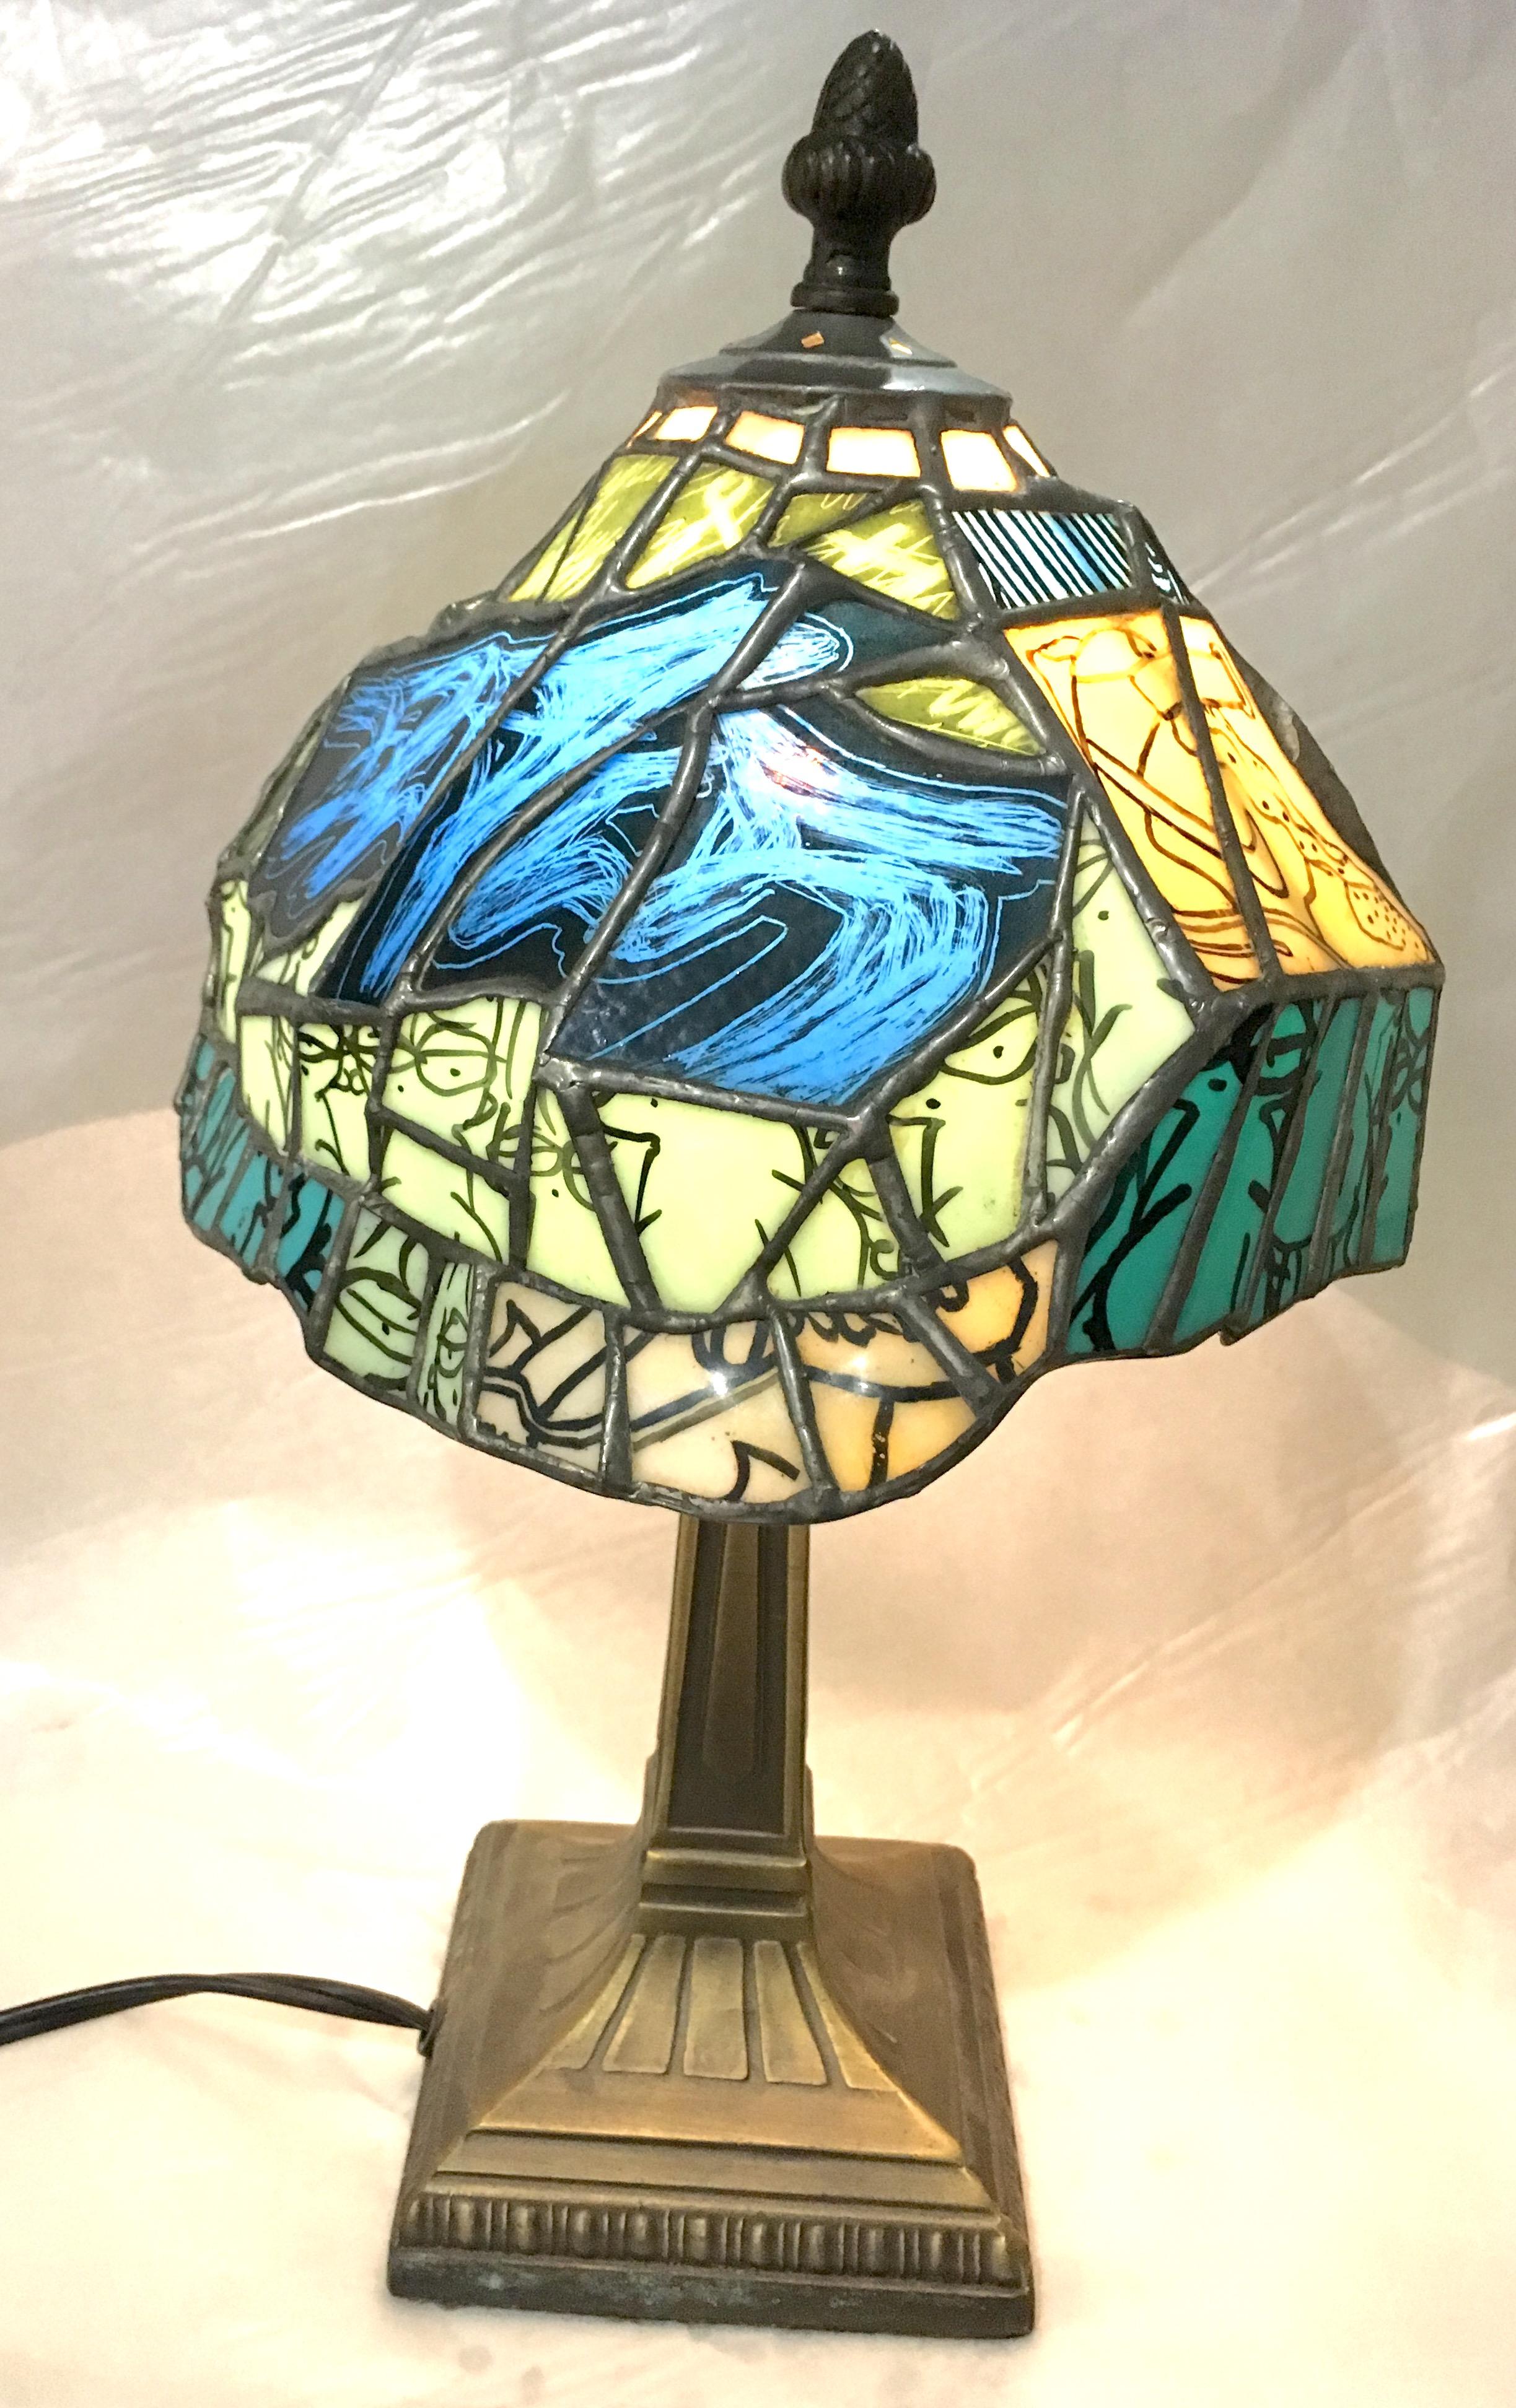 Handcrafted by TF Dutchman, Secret Stash is a one of a kind original Tiffany style stained glass lamp. Brilliant blues, yellows, turquoises and greens are enhanced by kiln fired vitreous painting on the glass pieces. Elements of graffiti and sneaker